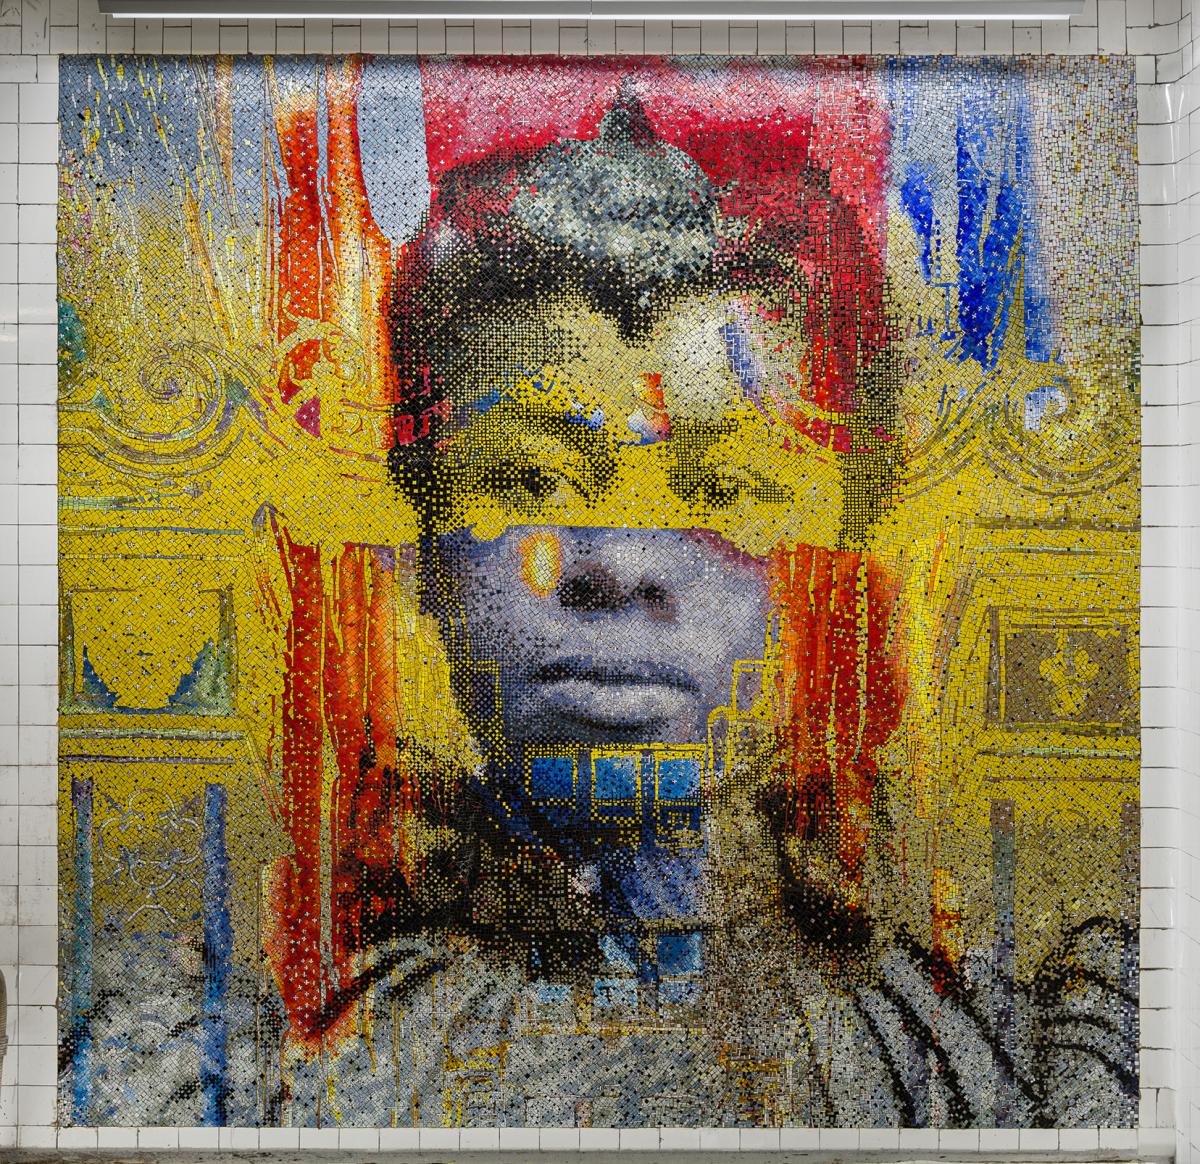 Mosaic artwork featuring a portrait of an early twentieth century woman with architectural elements superimposed.